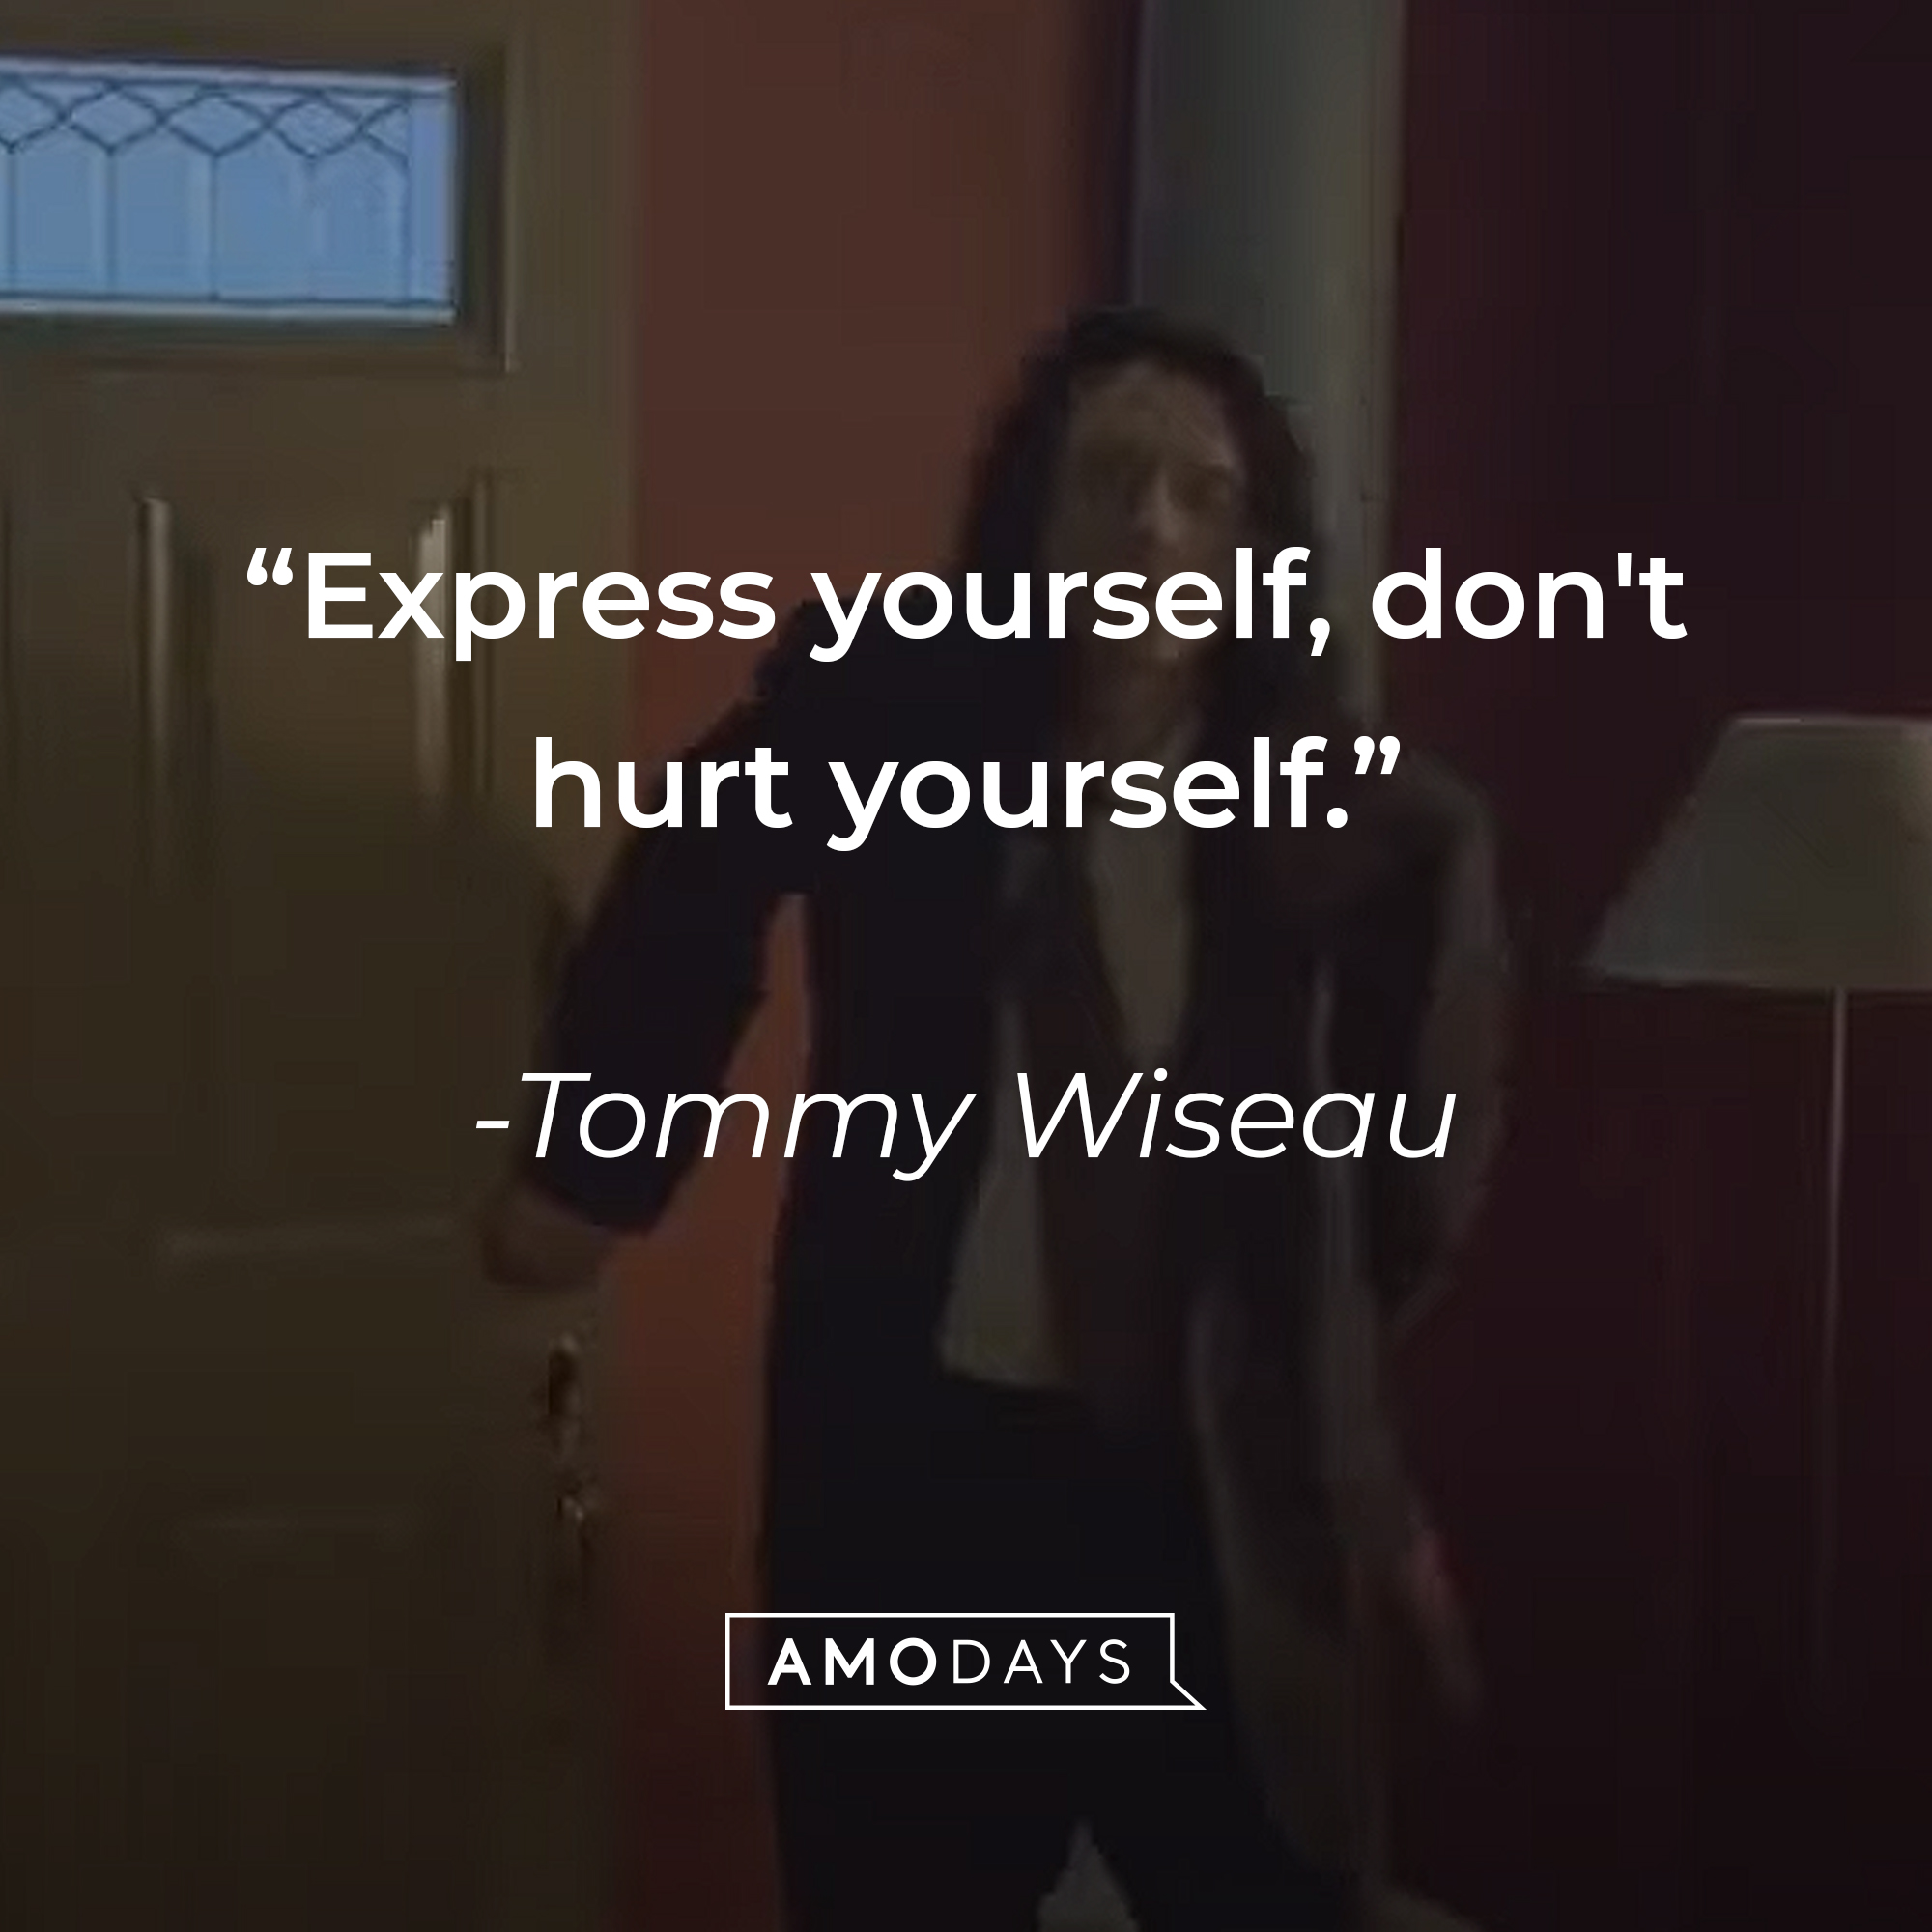 A Photo of Tommy Wiseau with the quote, "Express yourself, don't hurt yourself." | Source: YouTube/TommyWiseau